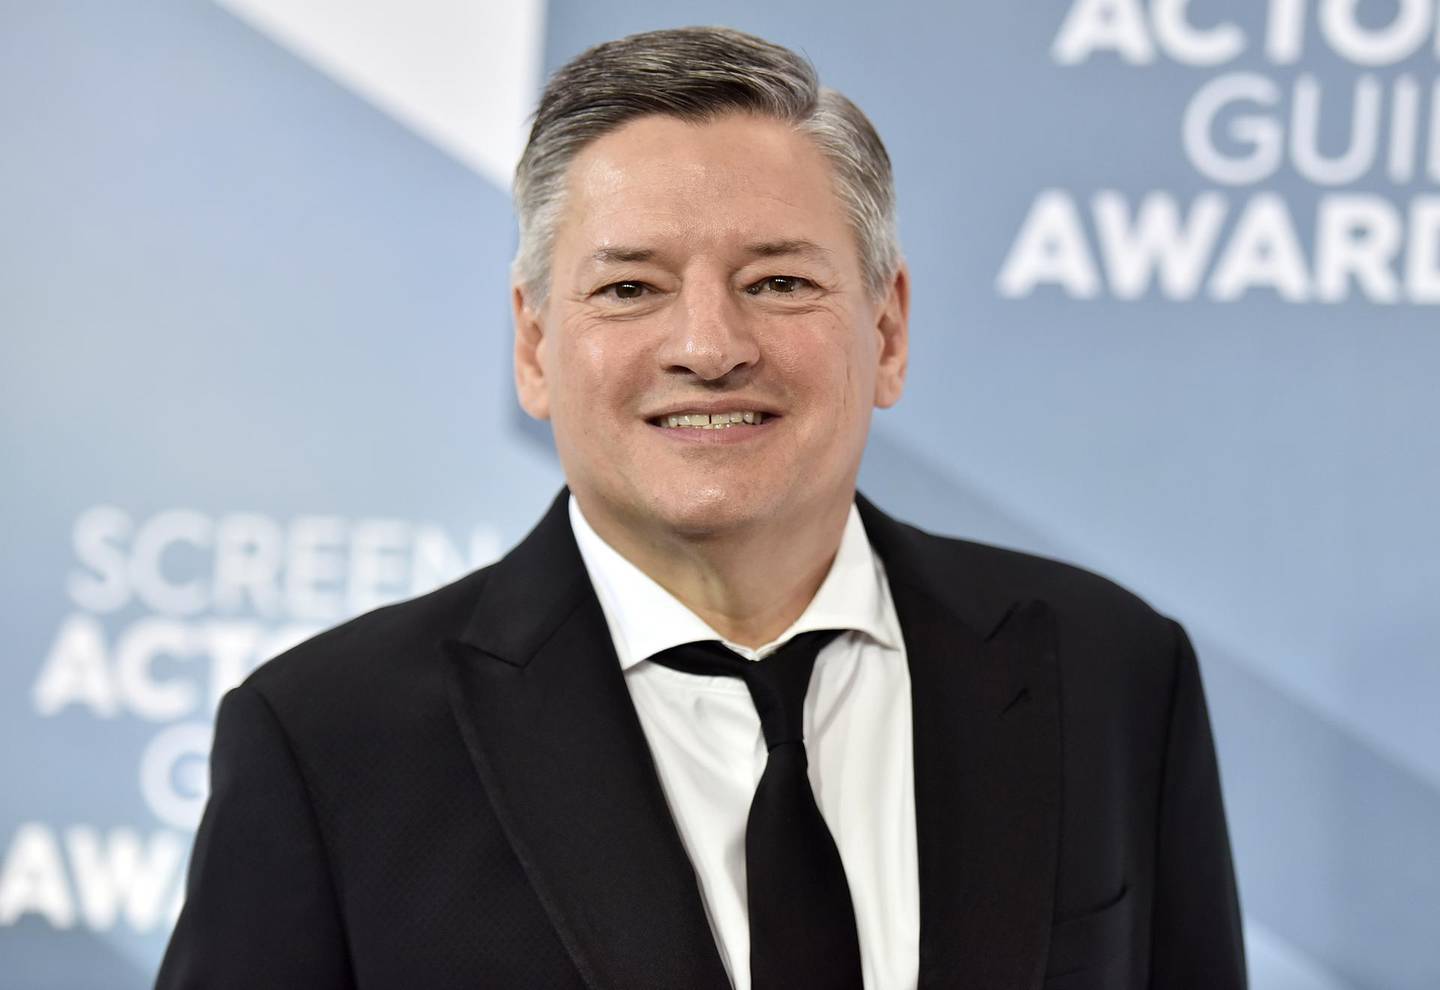 Ted Sarandos, Netflix's chief content officer, arrives at the 26th annual Screen Actors Guild Awards at the Shrine Auditorium & Expo Hall on Sunday, Jan. 19, 2020, in Los Angeles. (Photo by Richard Shotwell/Invision/AP)